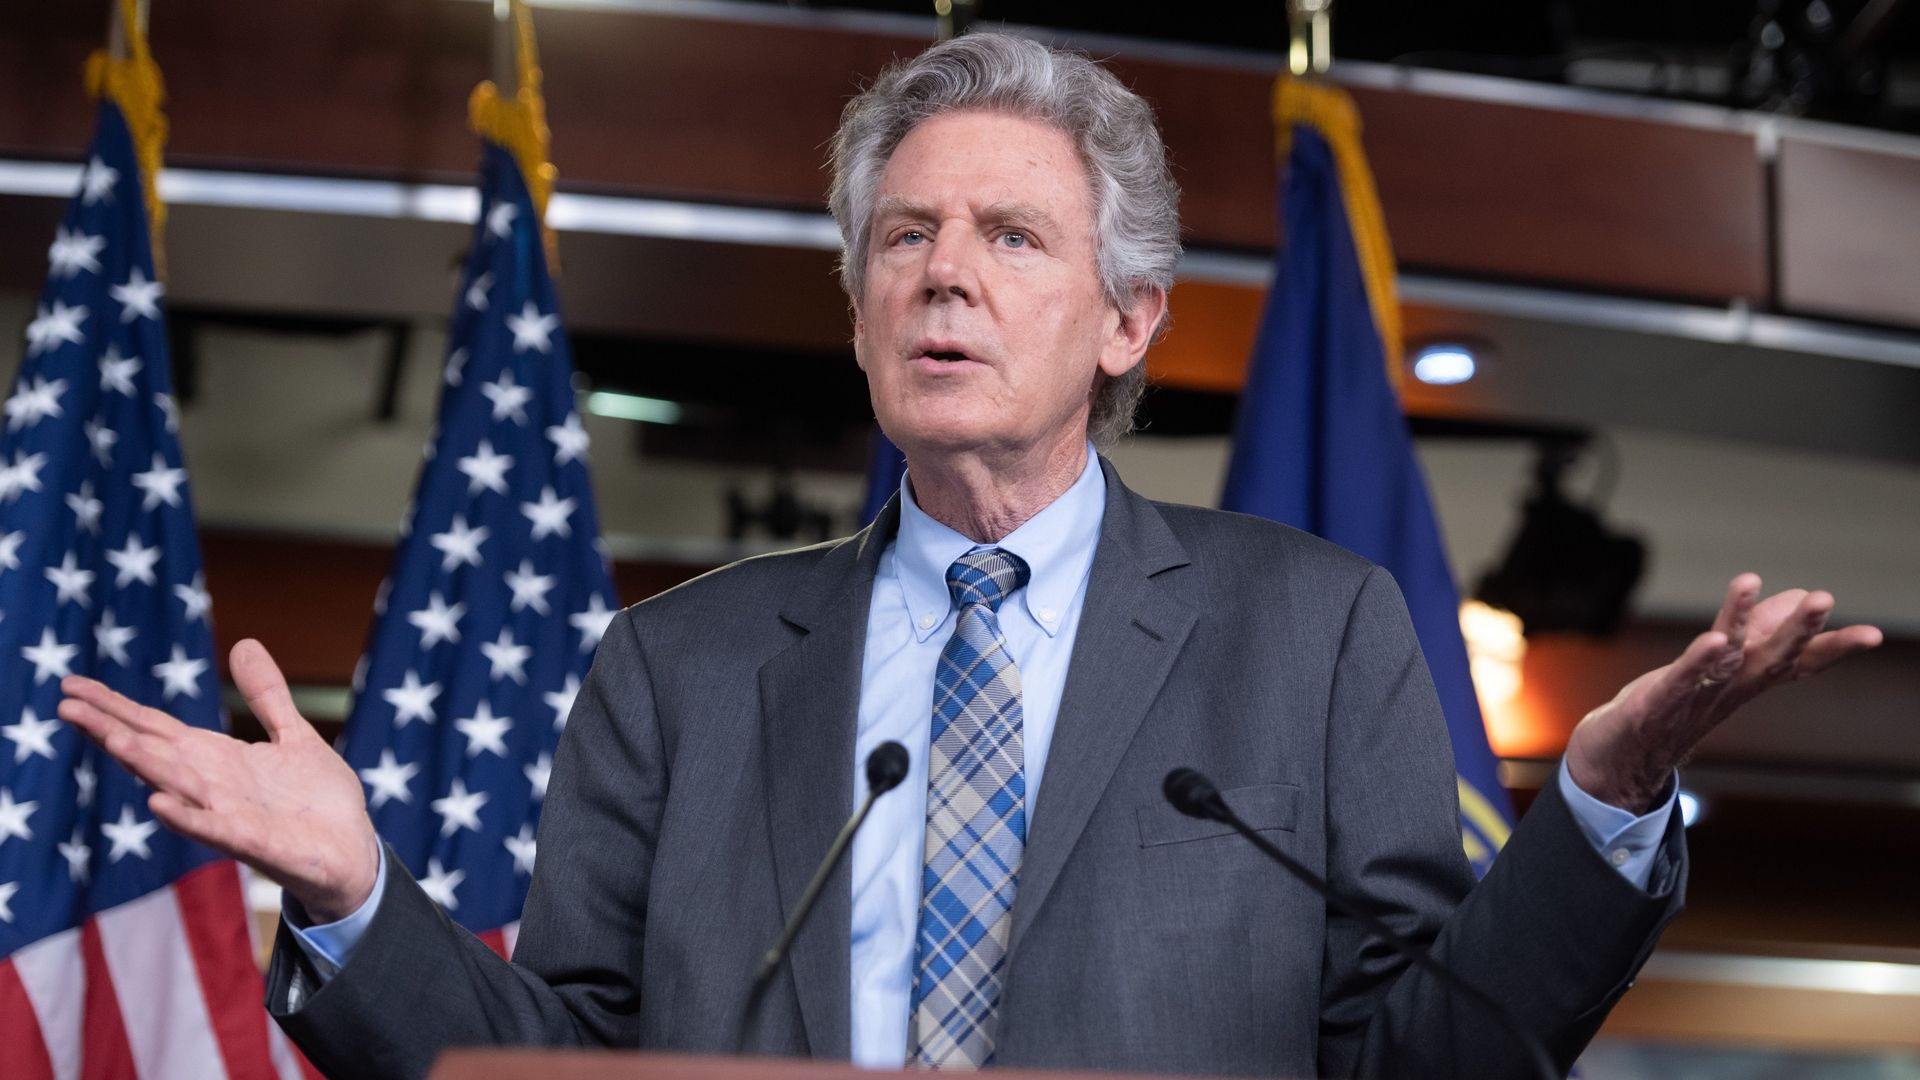 Rep. Frank Pallone (D-NJ) speaks at a podium with this hands upturned during a press conference